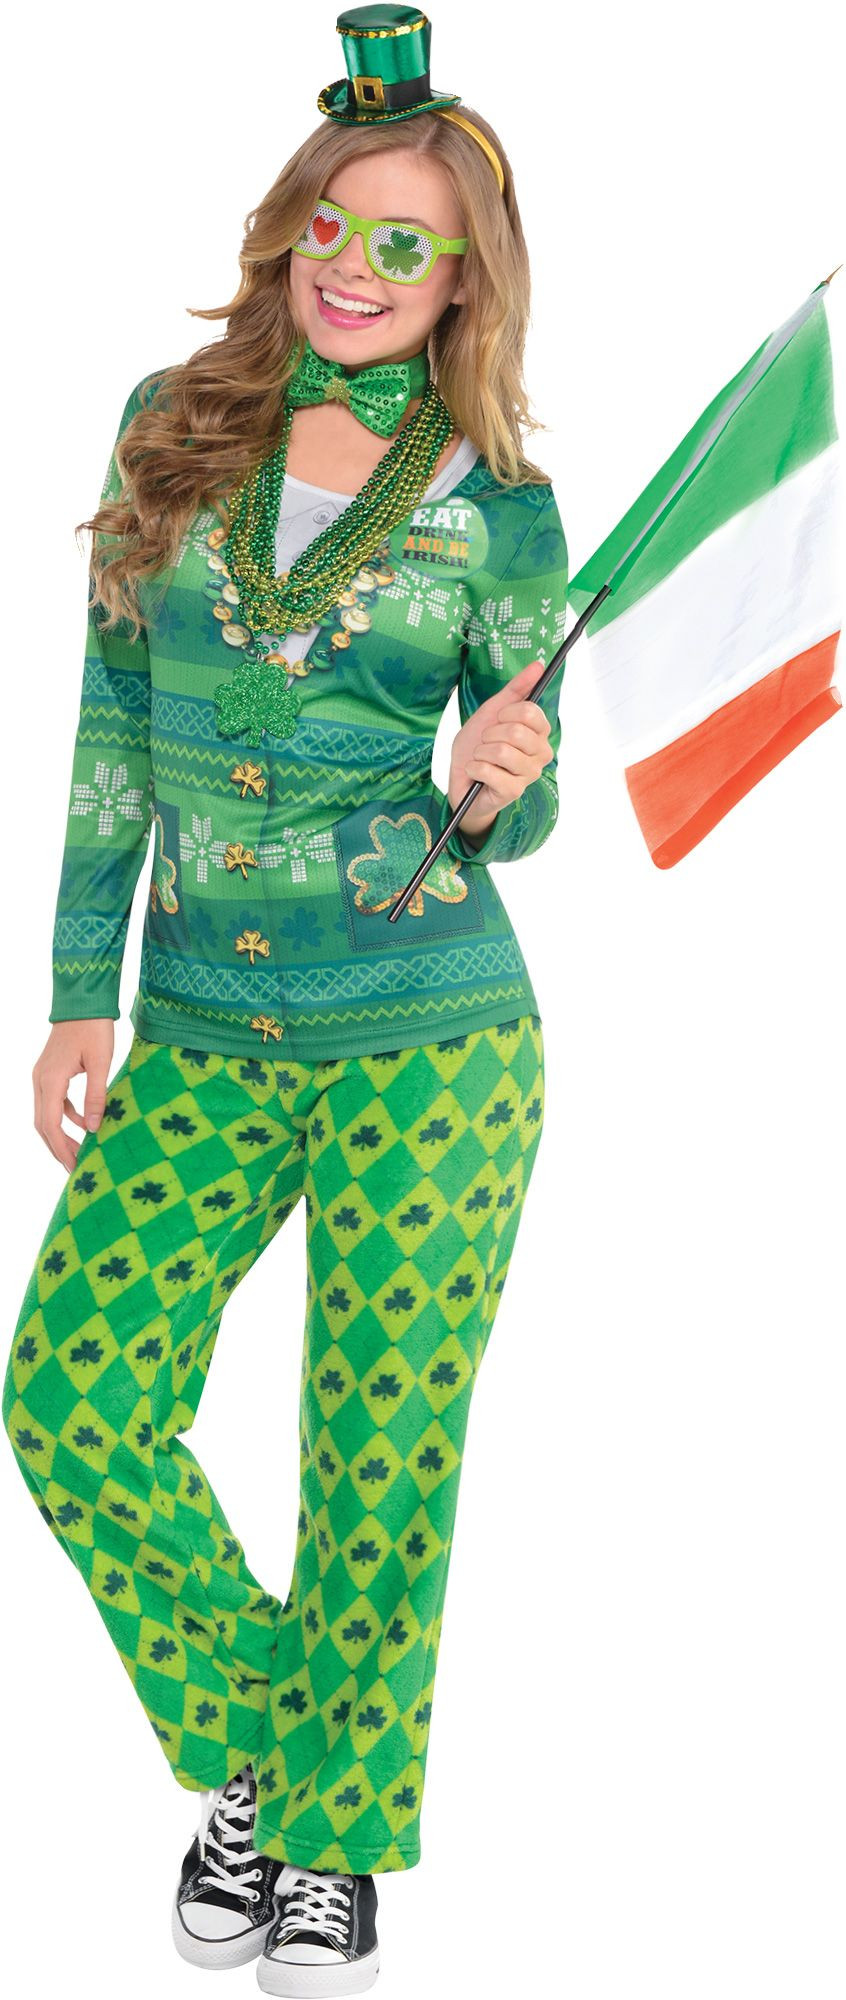 Party City St Patrick's Day Costumes
 Women s Cute & Sweet St Patrick s Day Wearables Party City